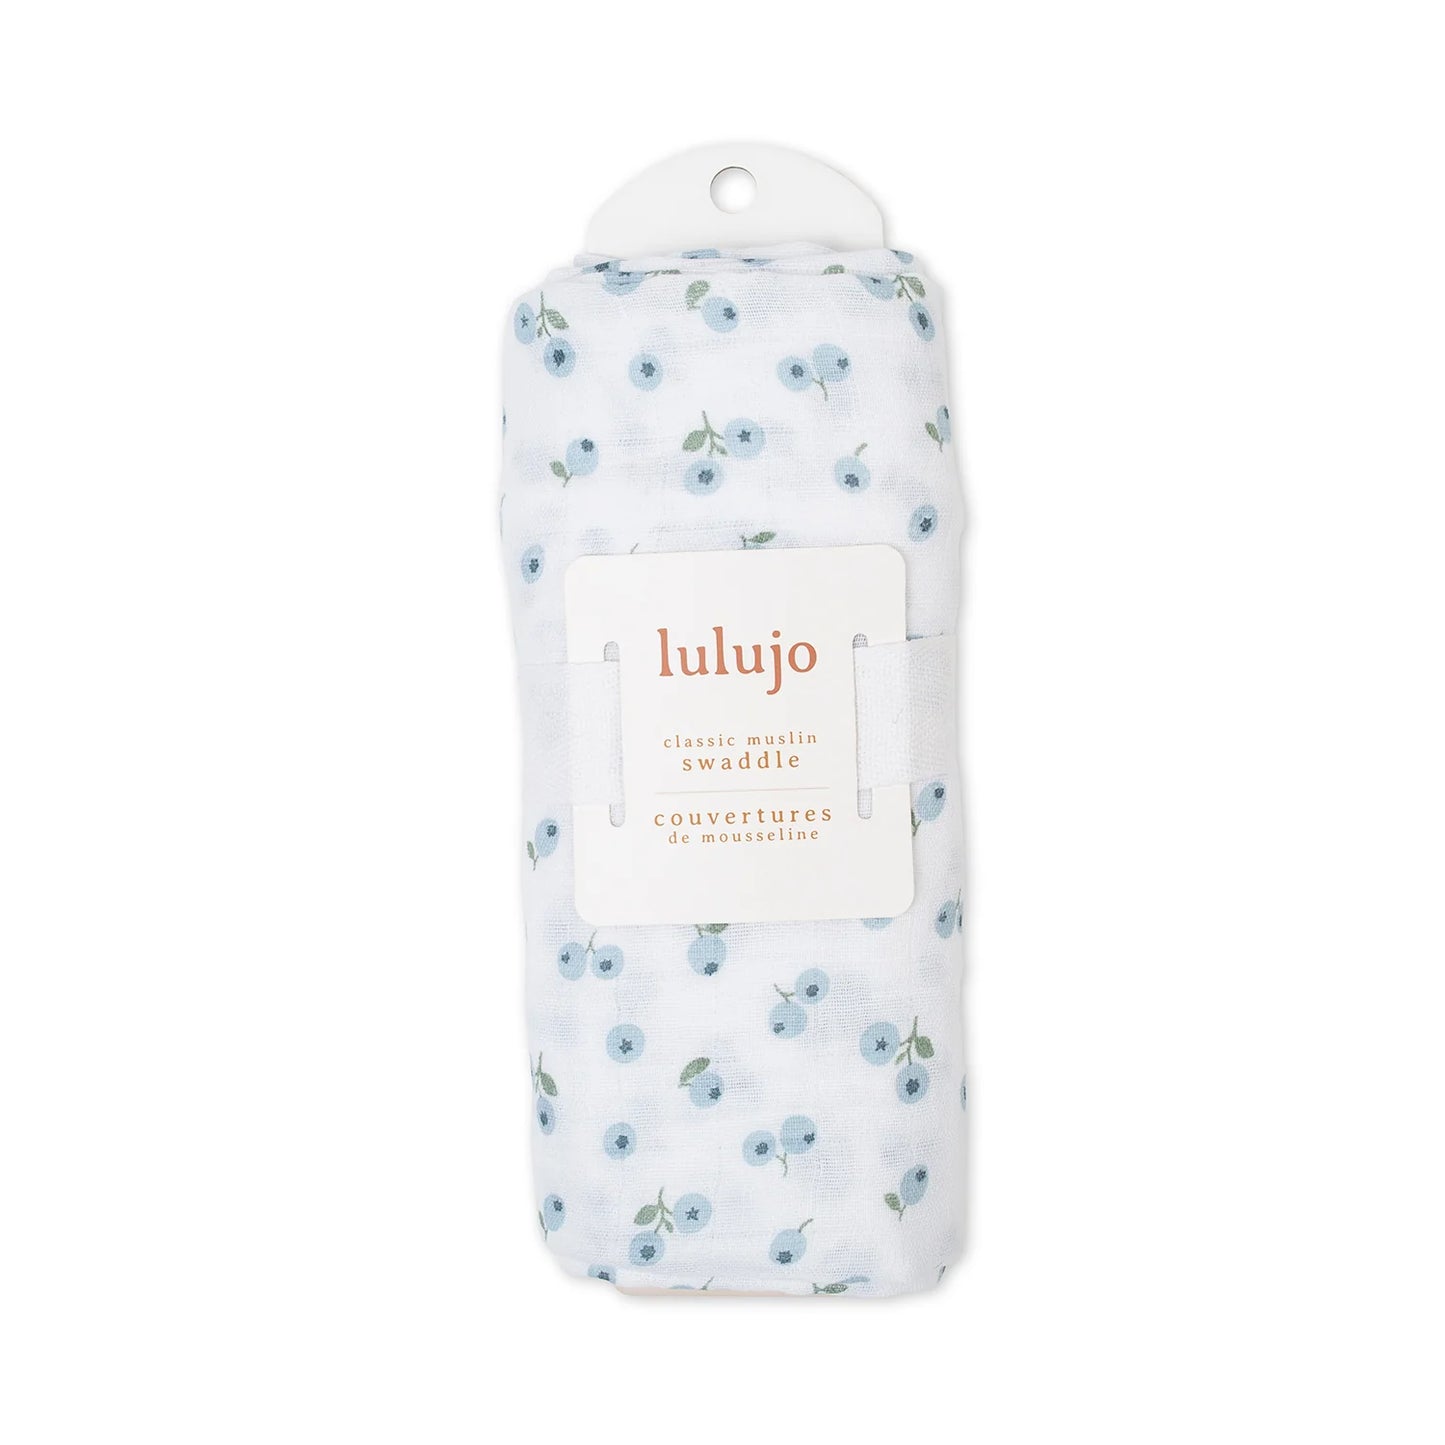 Cotton Muslin Swaddle - Blueberries